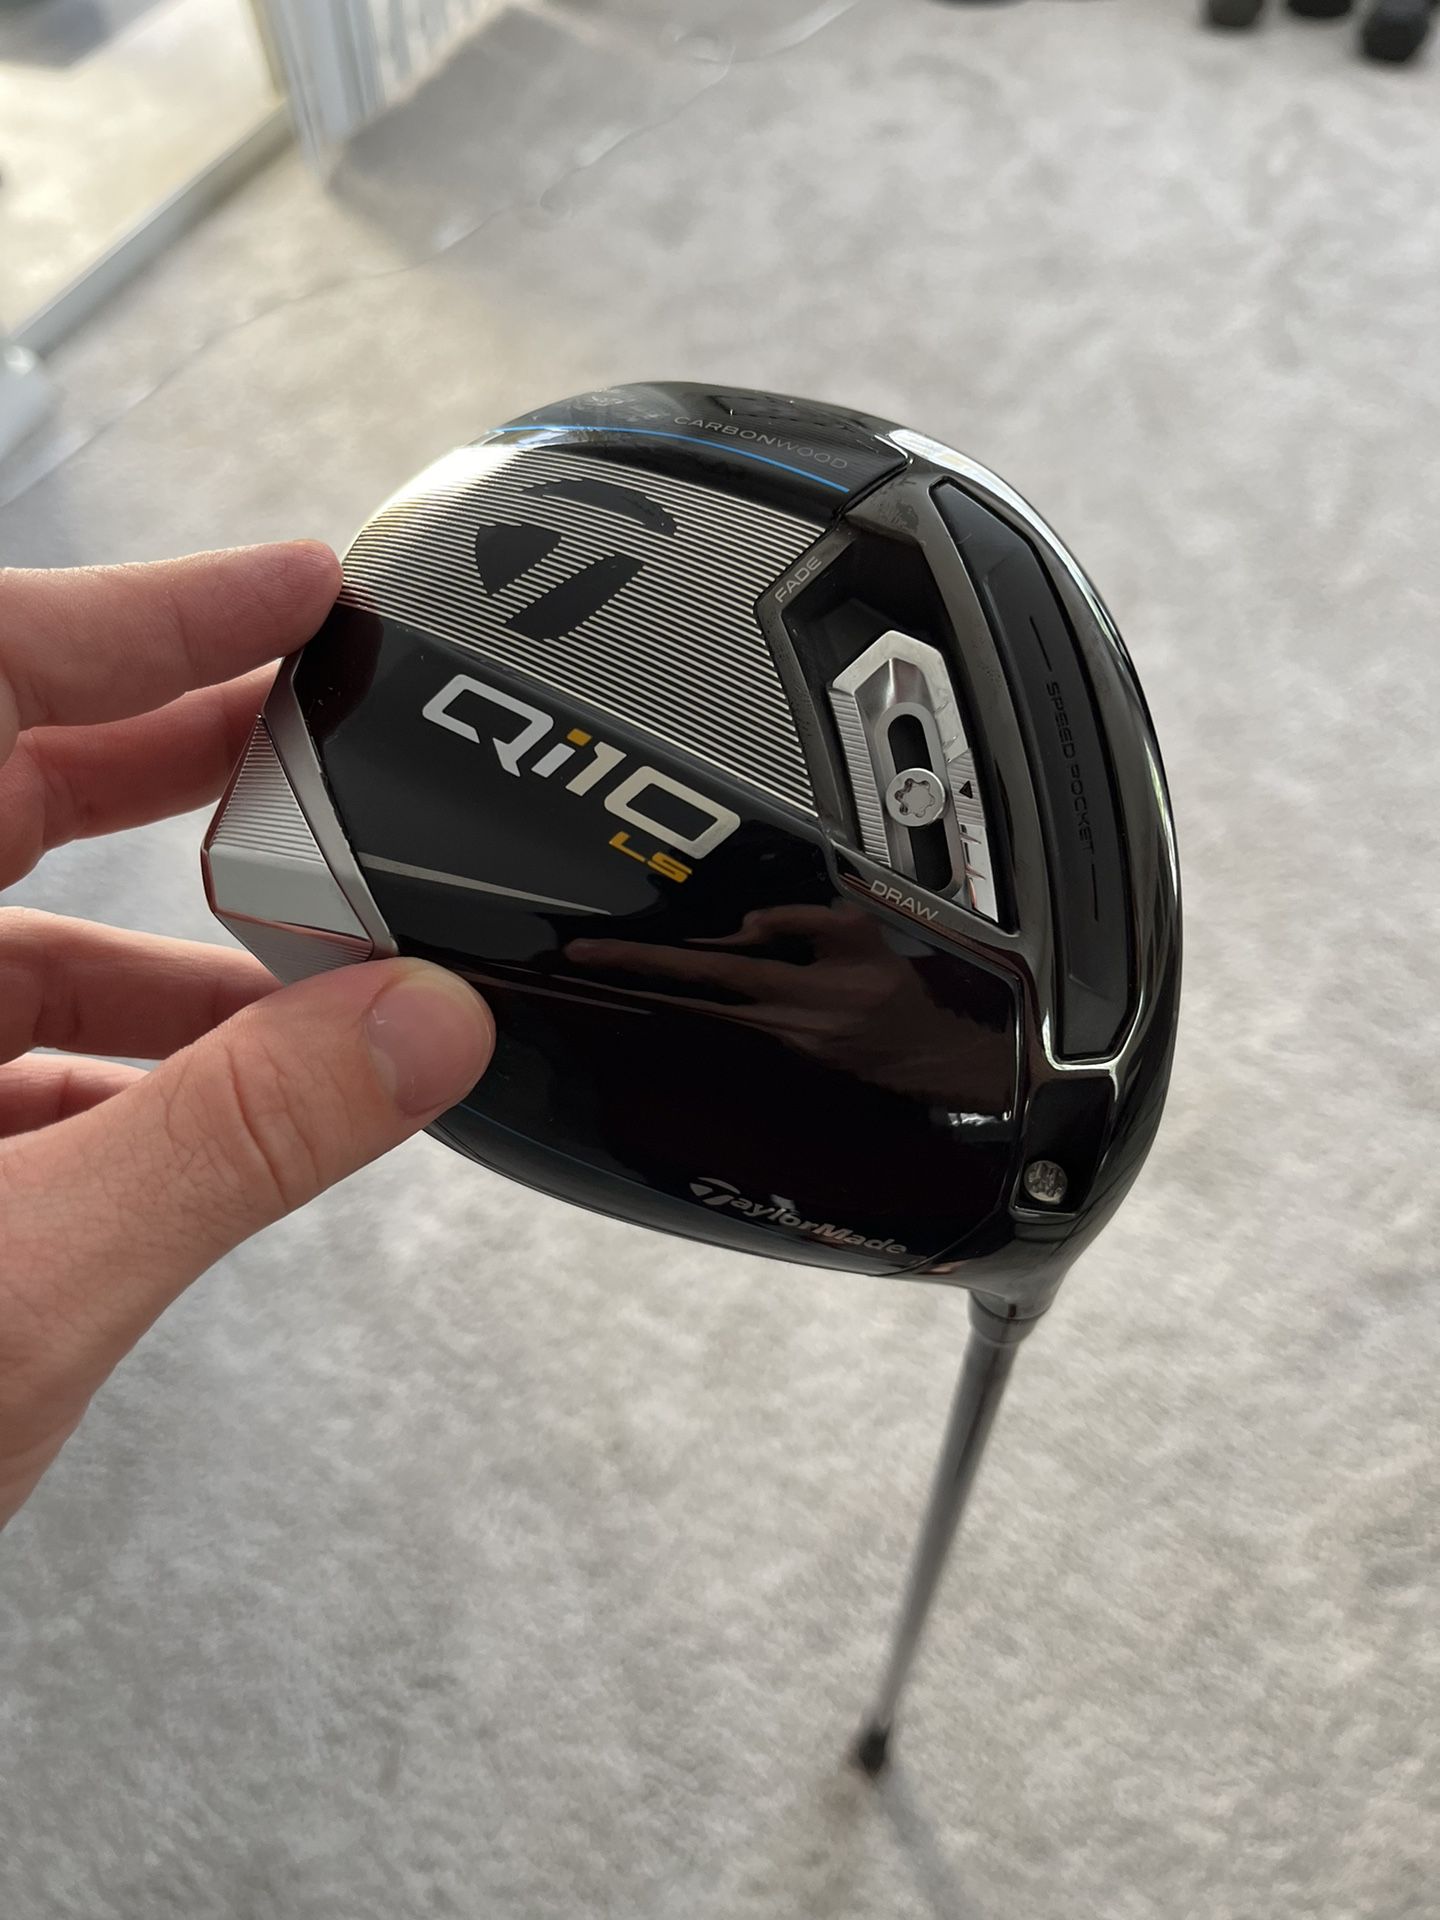 Qi10 Driver. Played With Once